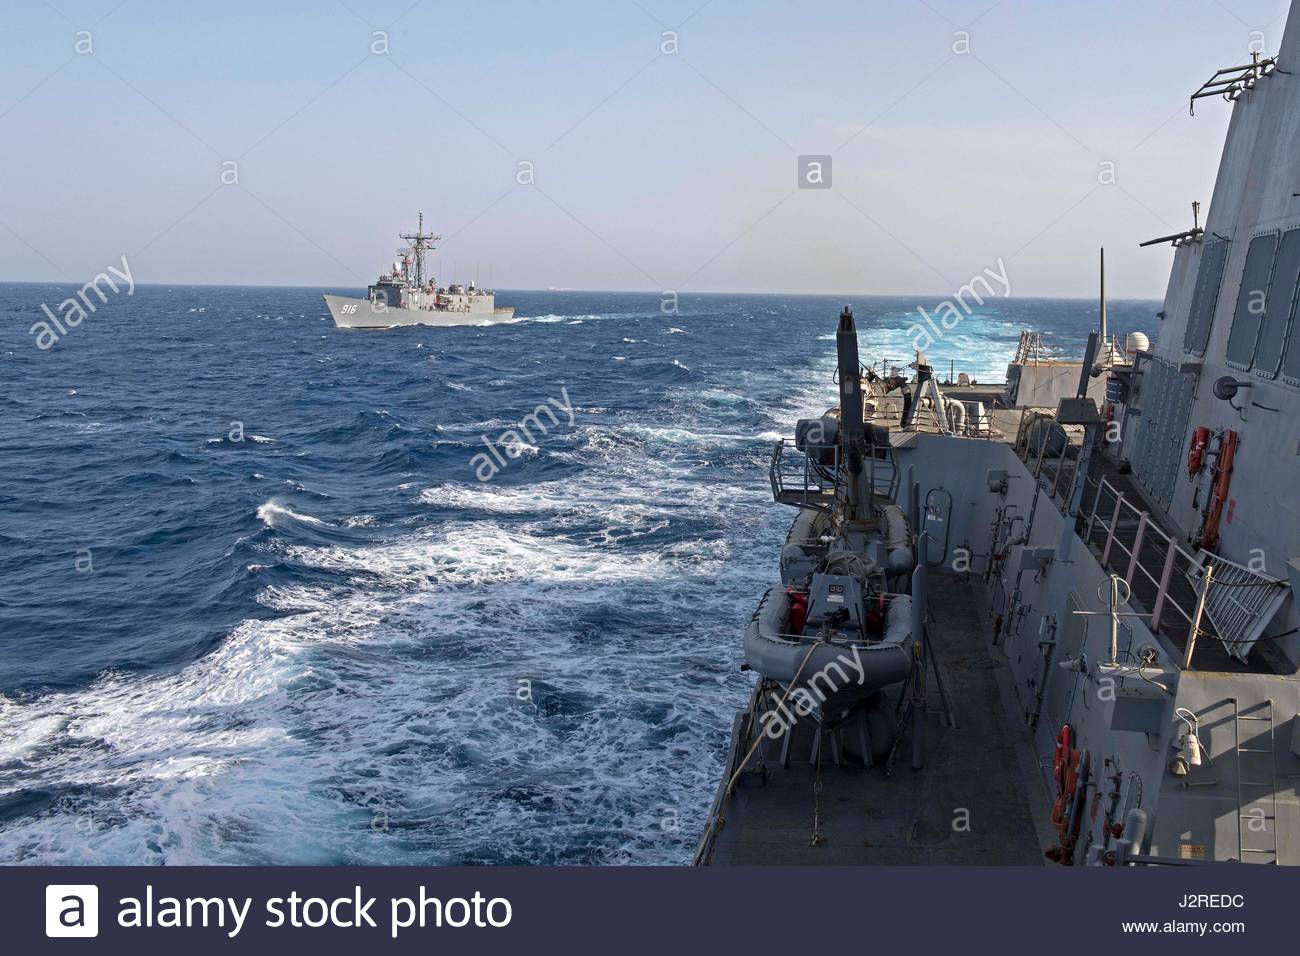 170425-n-nb178-297-red-sea-april-25-2017-egyptian-guided-missile-frigate-J2REDC.jpg